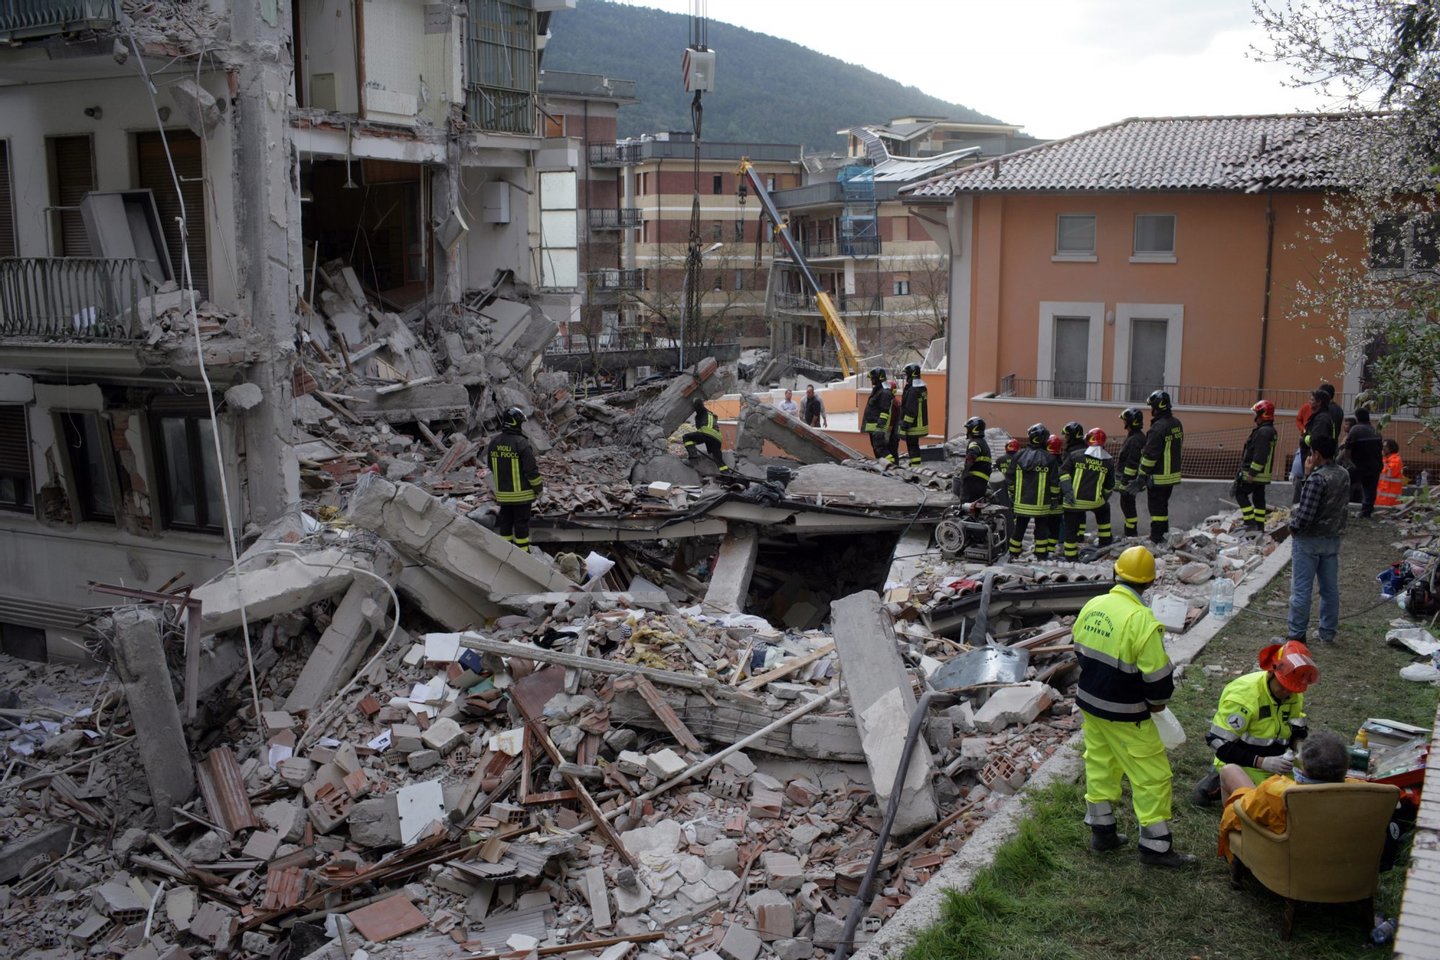 L'AQUILA, ITALY - APRIL 06: Rescue workers search for trapped people on a damaged building after an earthquake on April 6, 2009 in L'Aquila, Italy. The 6.3 magnitude earthquake tore through central Italy, devastating historic mountain towns, killing at least 150 people and injuring 1500. (Photo by Marco Di Lauro/Getty Images)